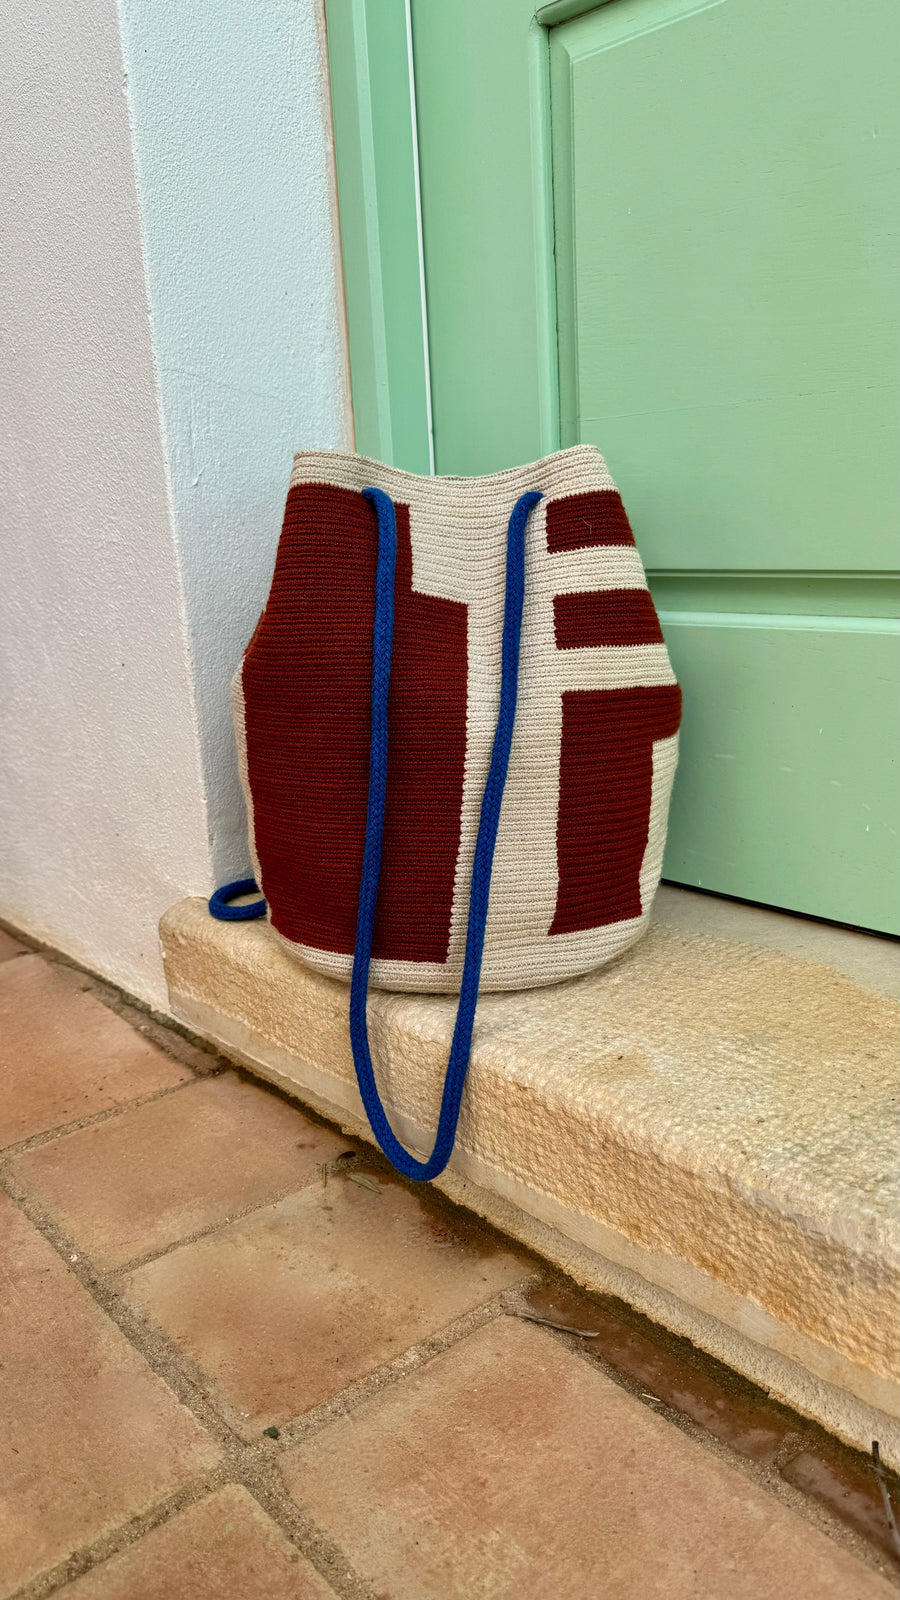 A red and beige coloured cotton bag with blue straps in front of a green coloured door